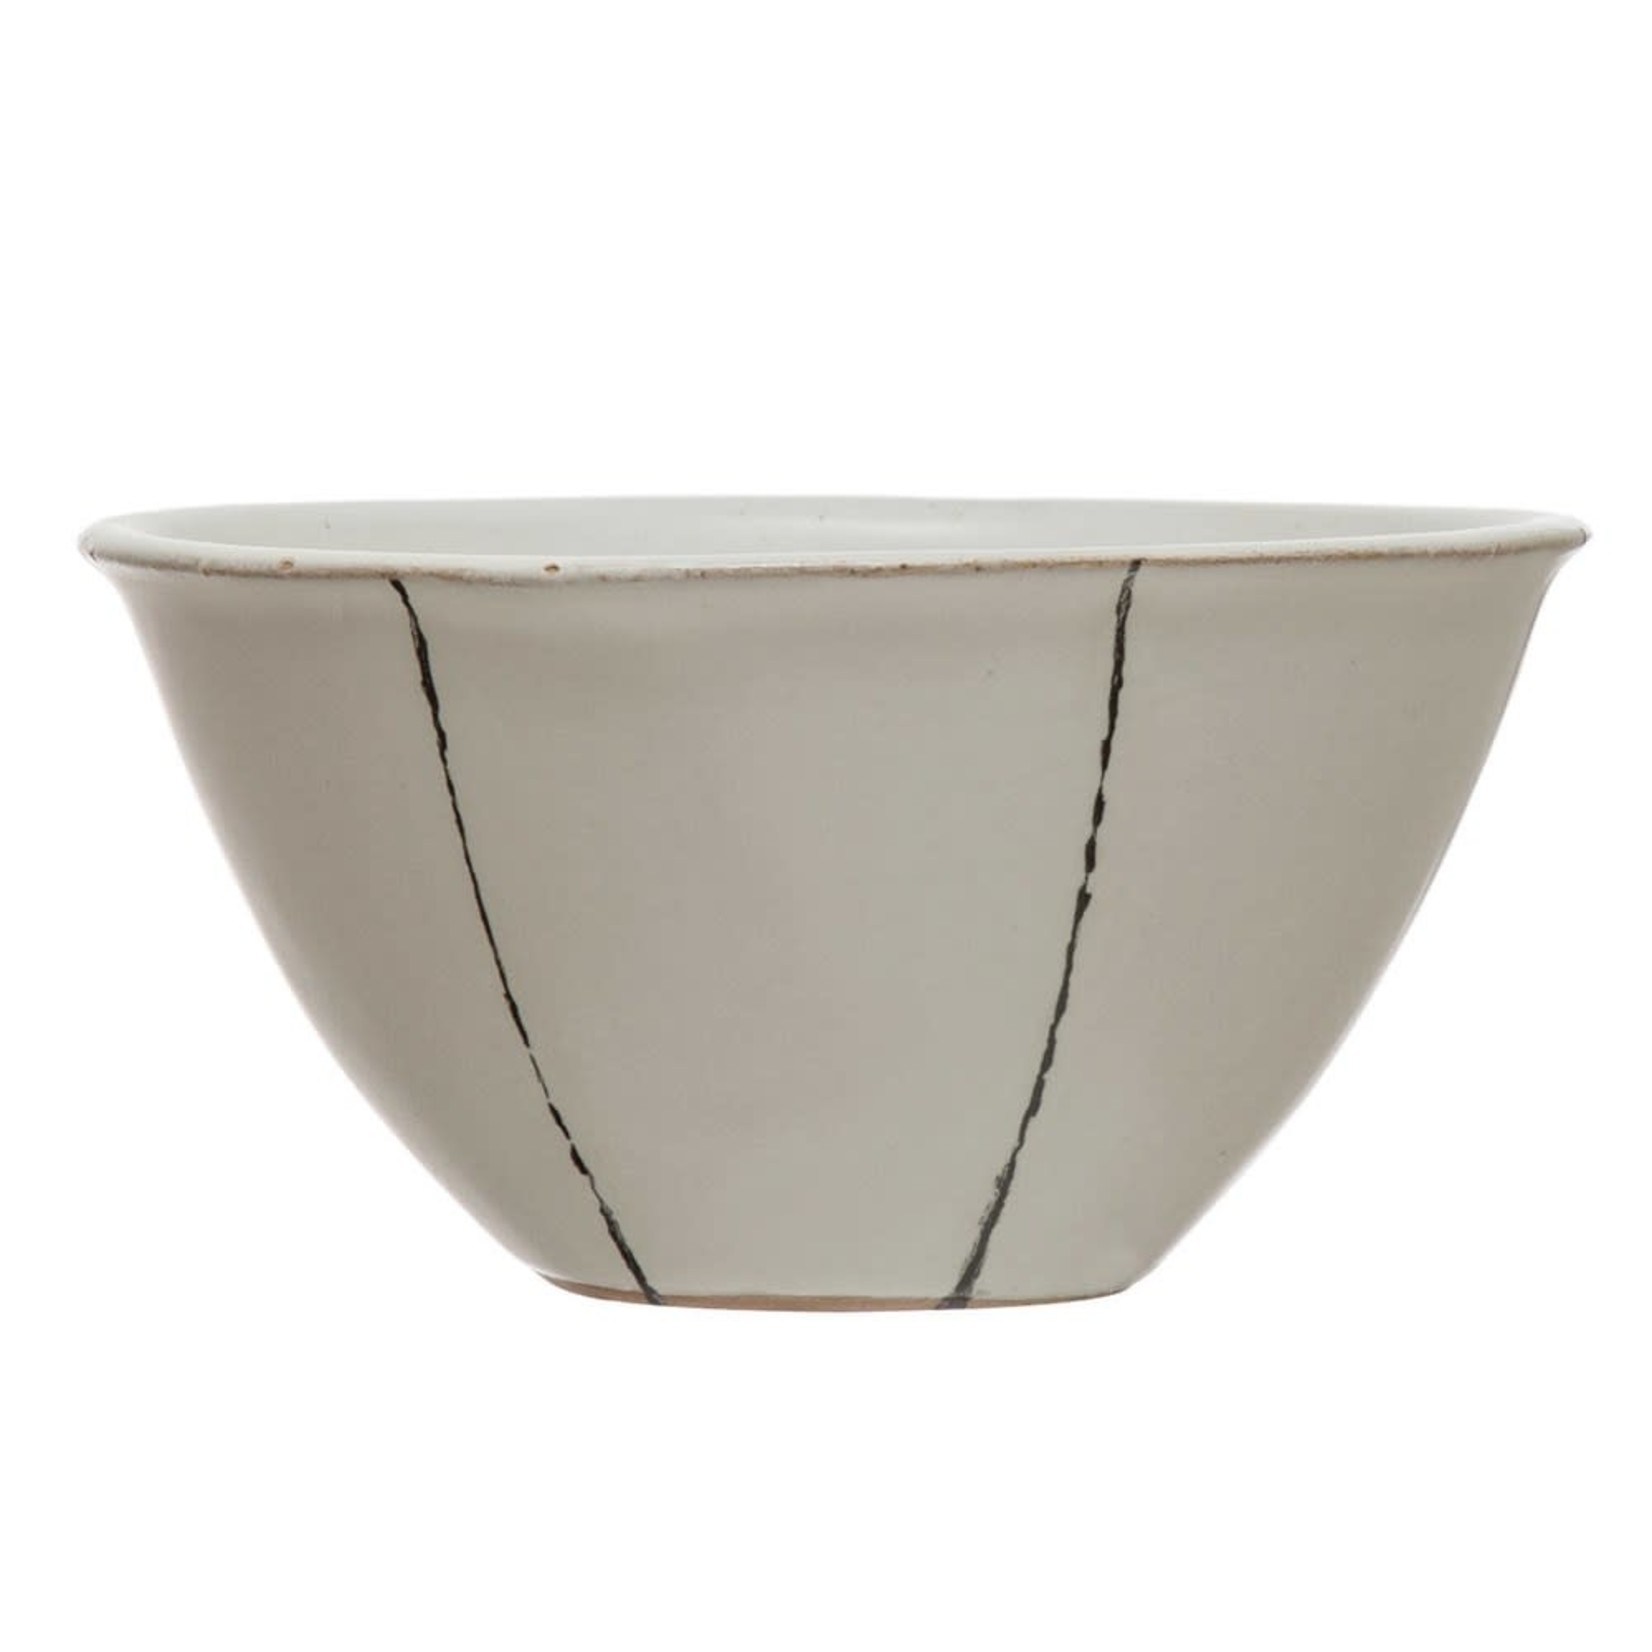 5" Round x 2-1/2"H Hand-Painted Stoneware Bowl, Matte White w/ Black Stripes (Each One Will Vary)